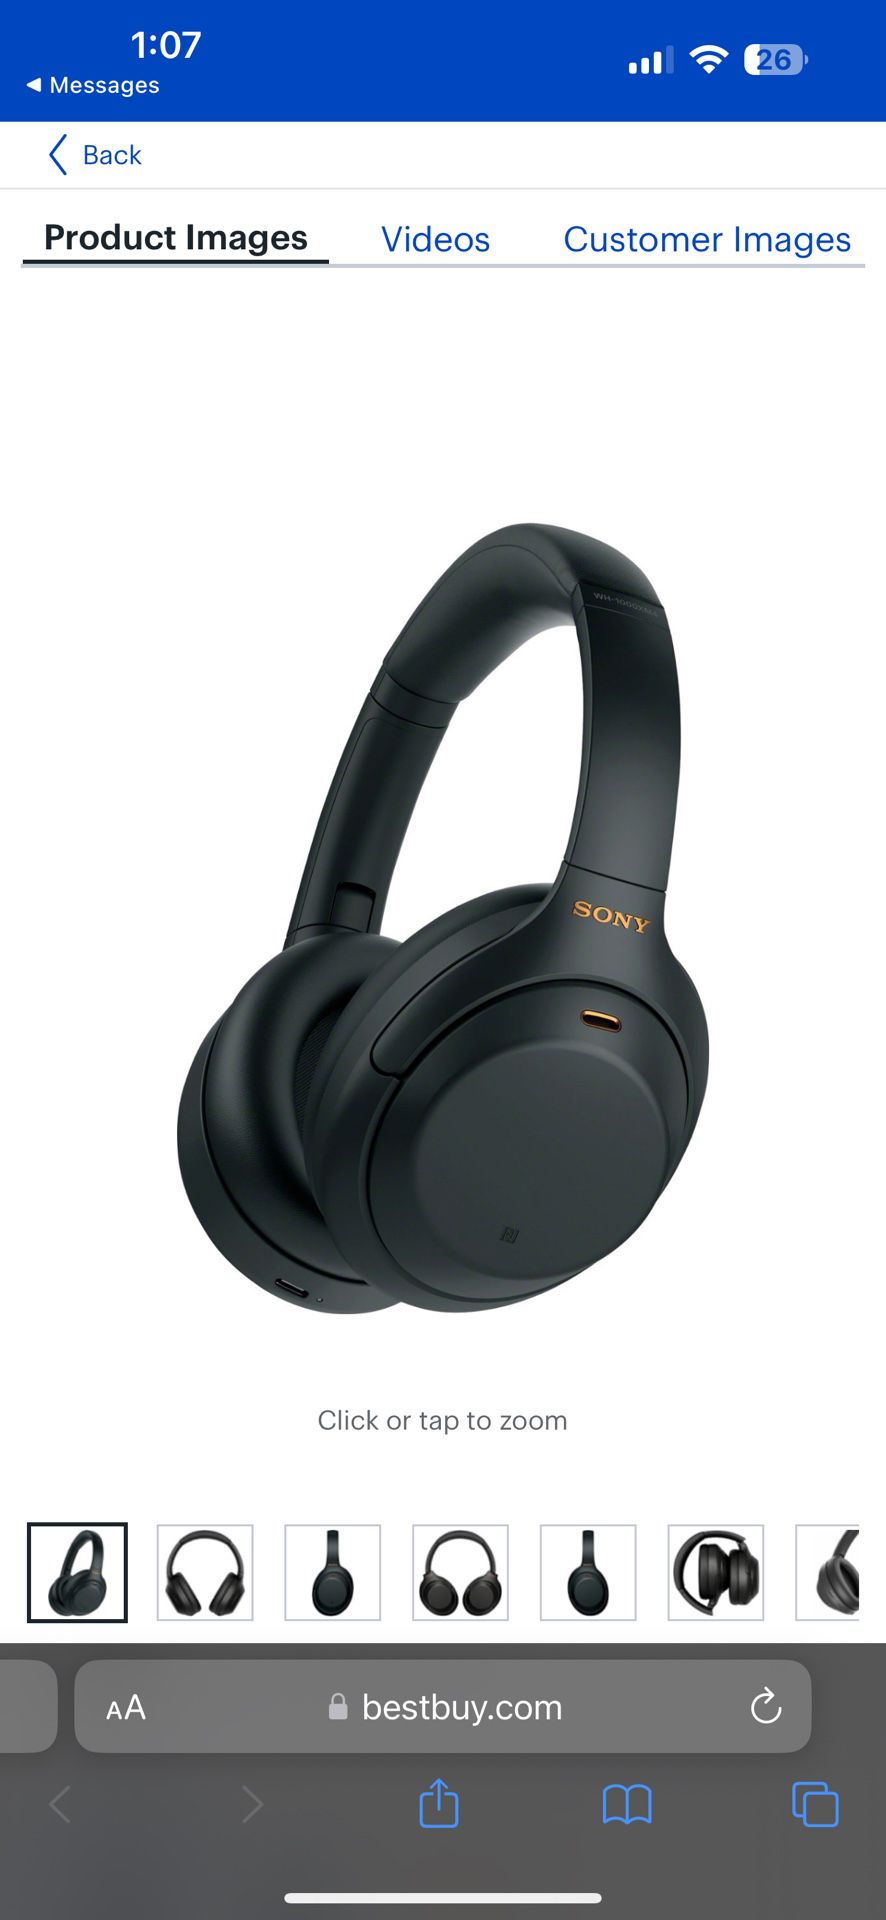 Sony - WH1000XM4 Wireless Noise-Cancelling Over-the-Ear Headphones - Black